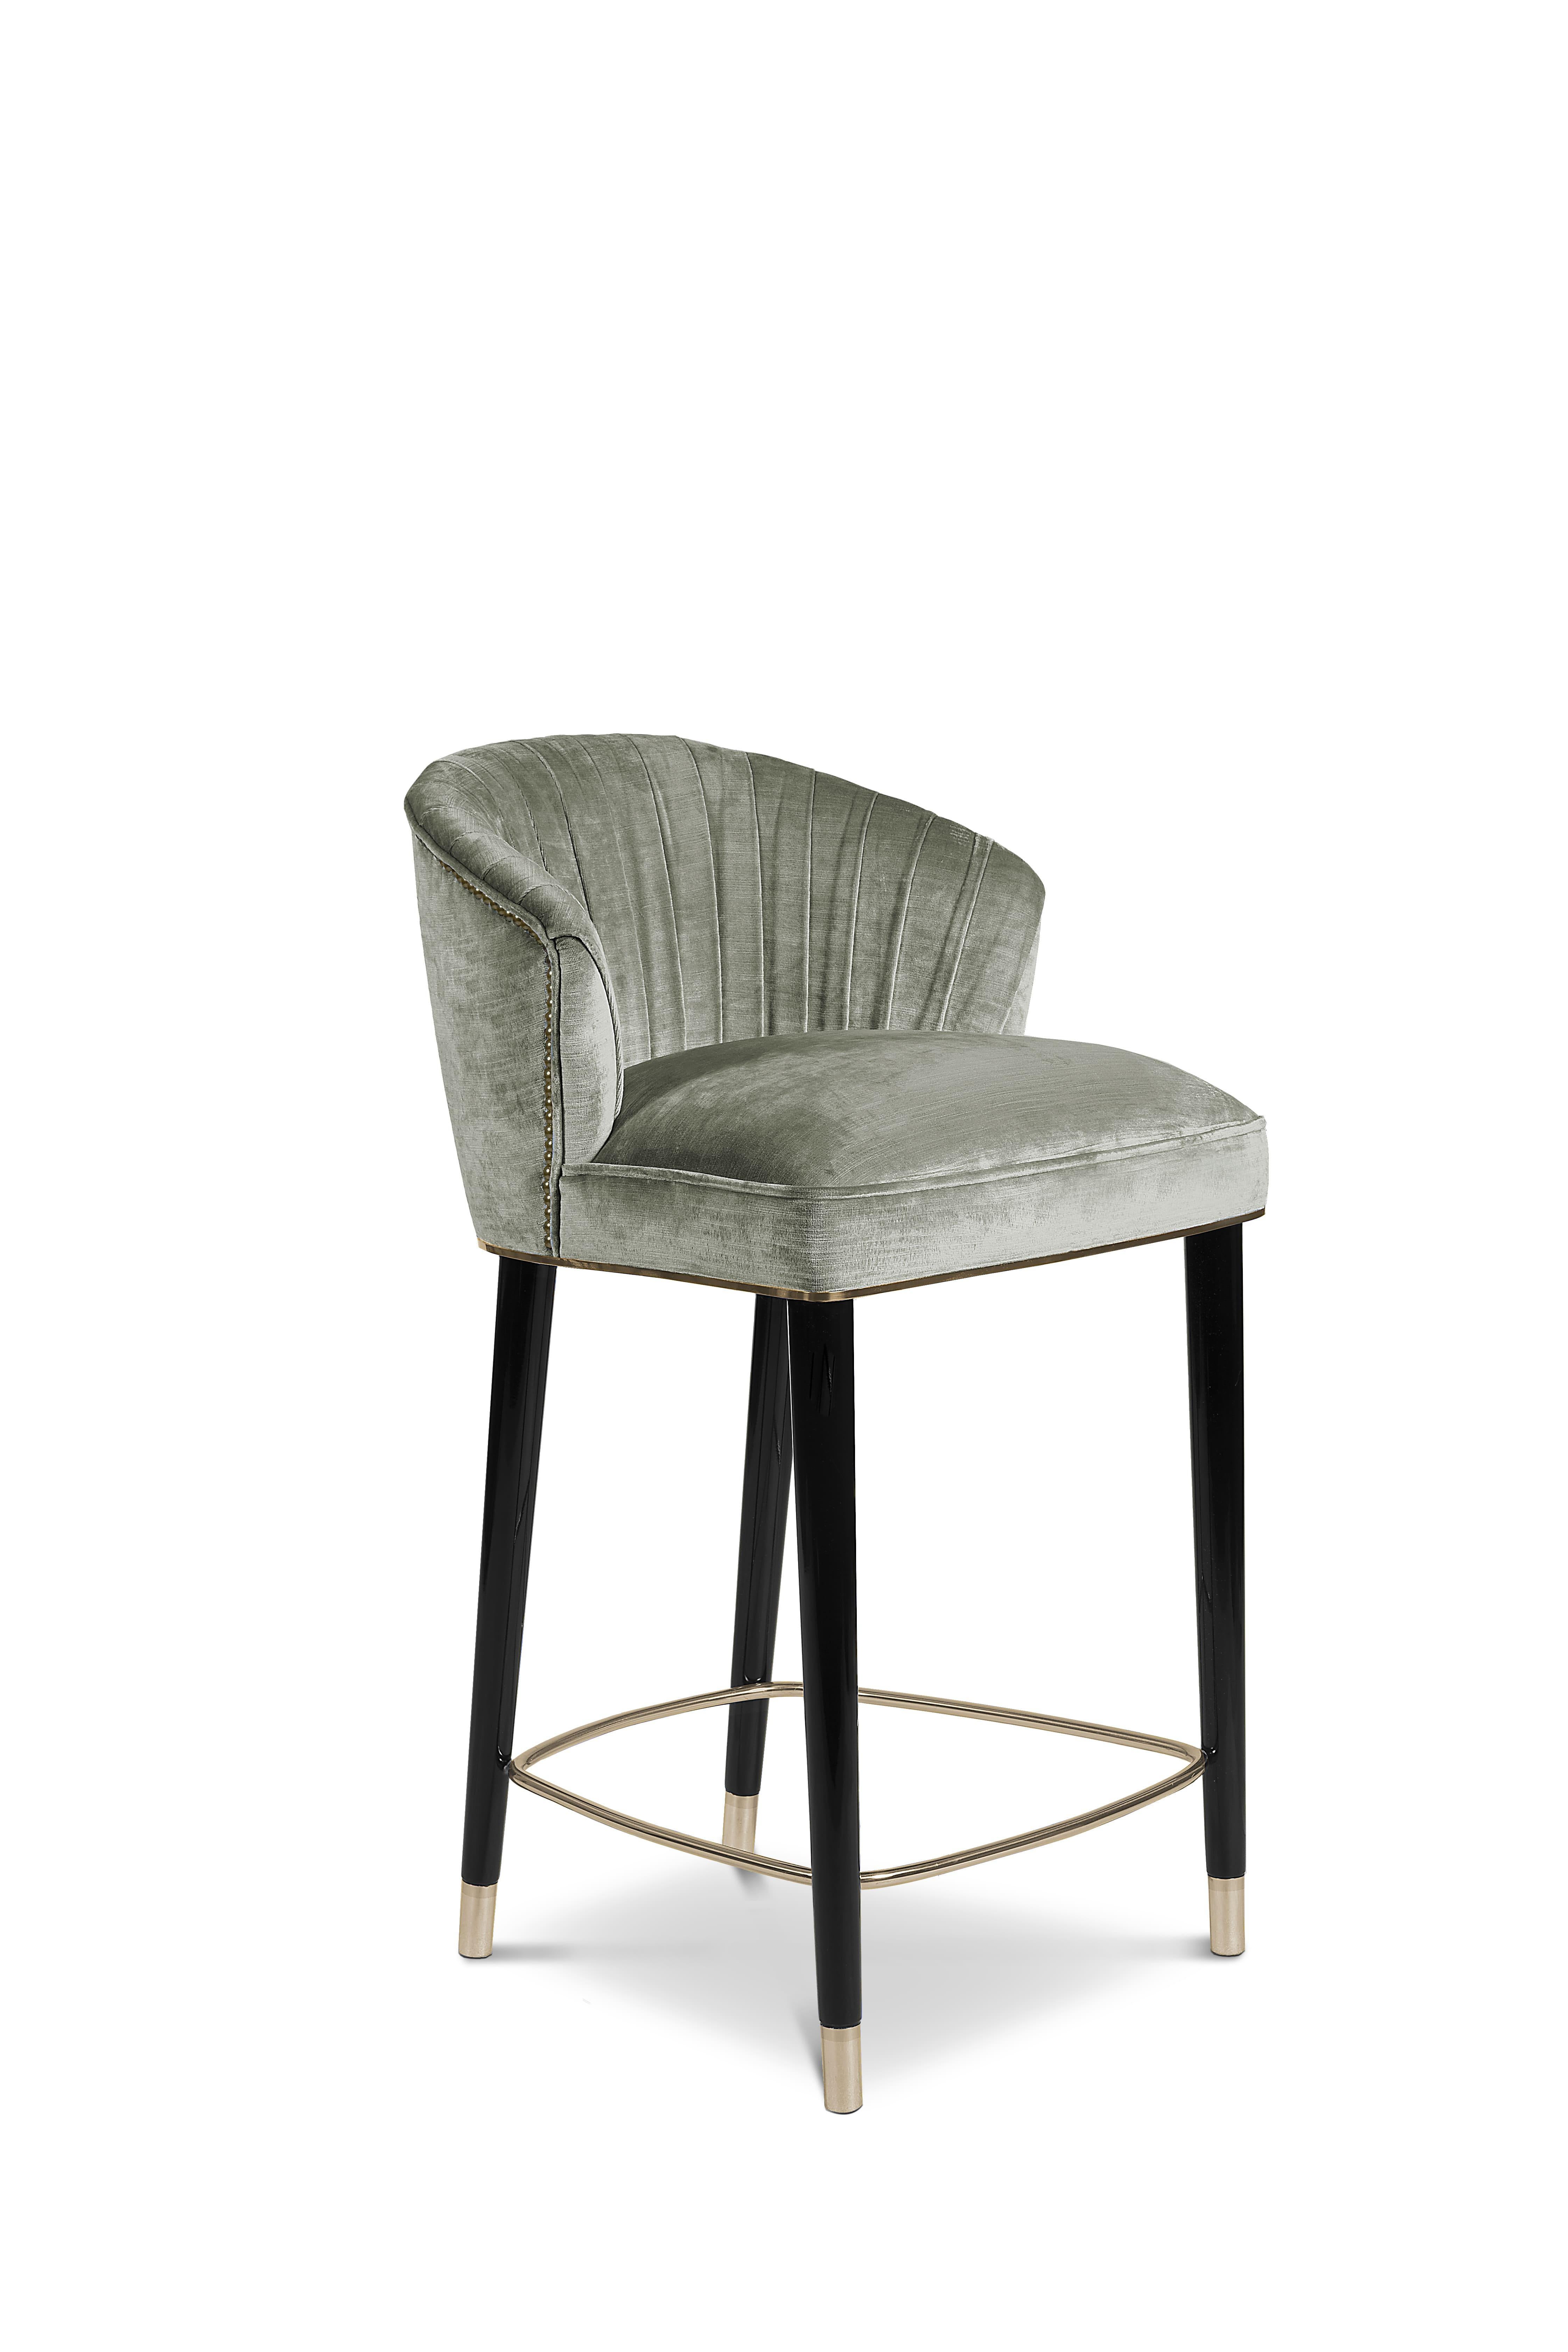 Nuka is a glacier in Alaska known for its sublime beauty. NUKA Counter Stool came to life inspired by this magnificent natural monument. Upholstered in velvet and legs in glossy black lacquered, this occasional chair with a curved back will make any